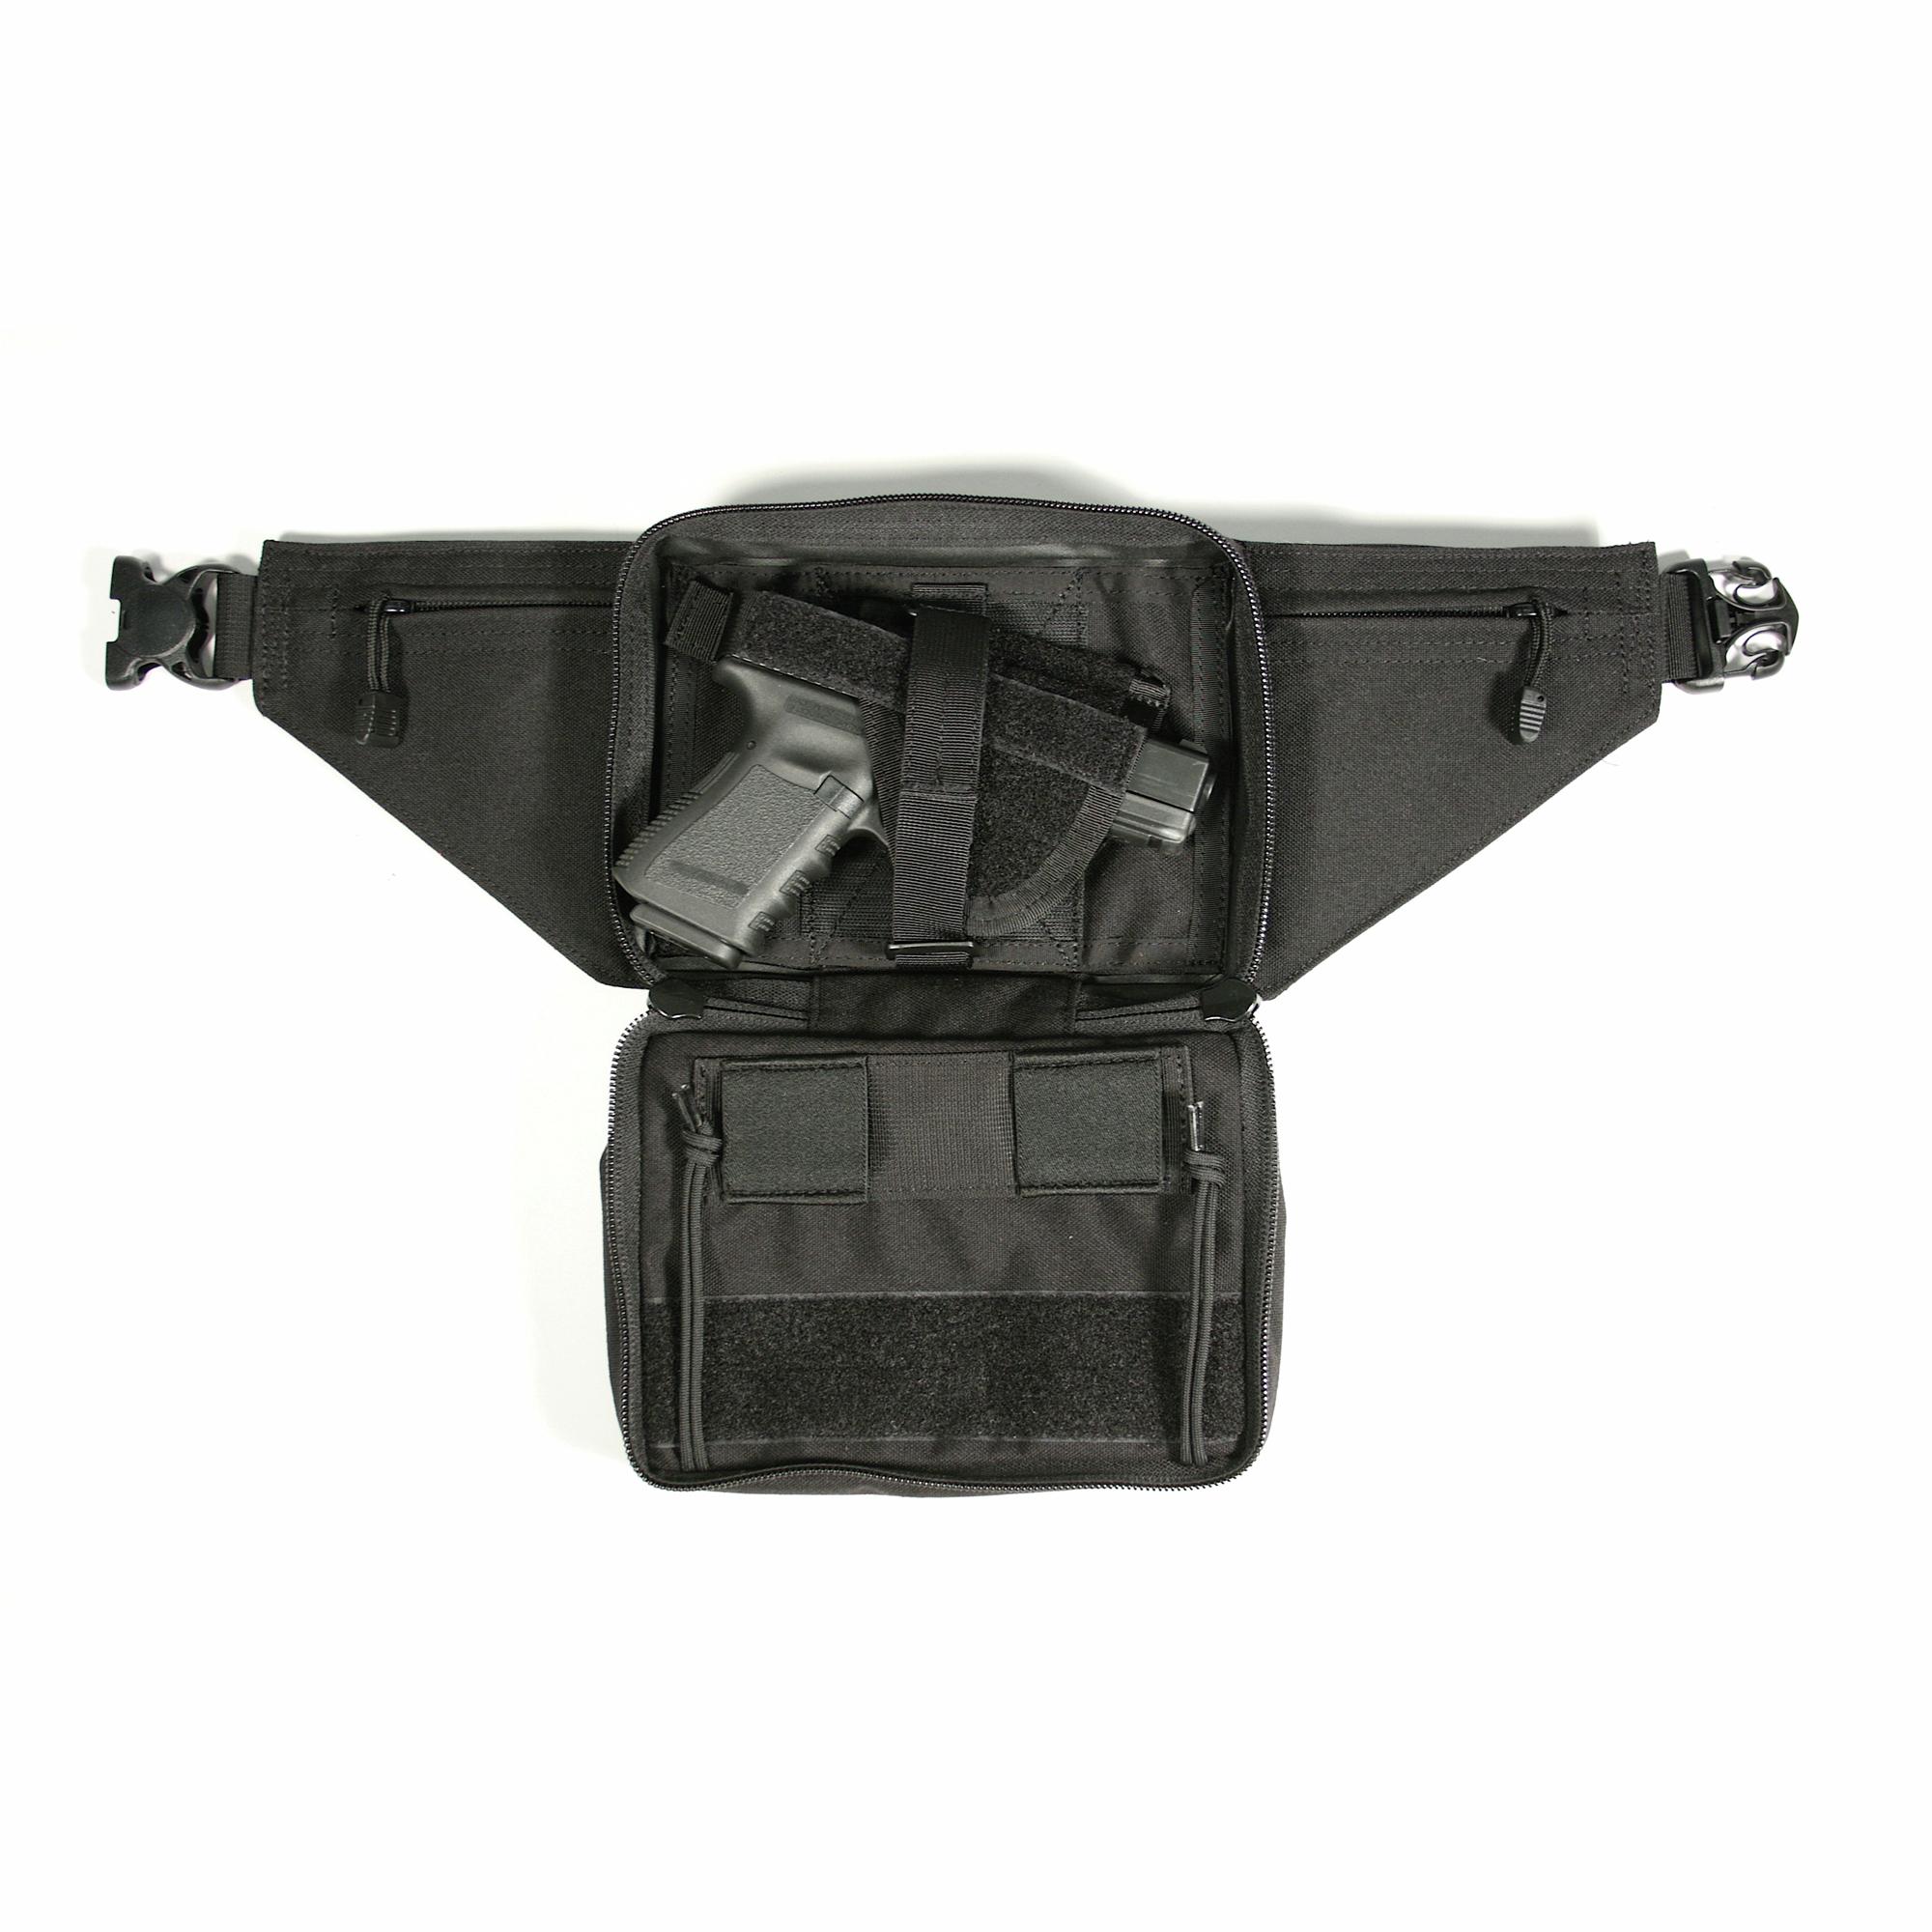 Buy Nylon Concealed Weapon Fanny Holster And More Blackhawk